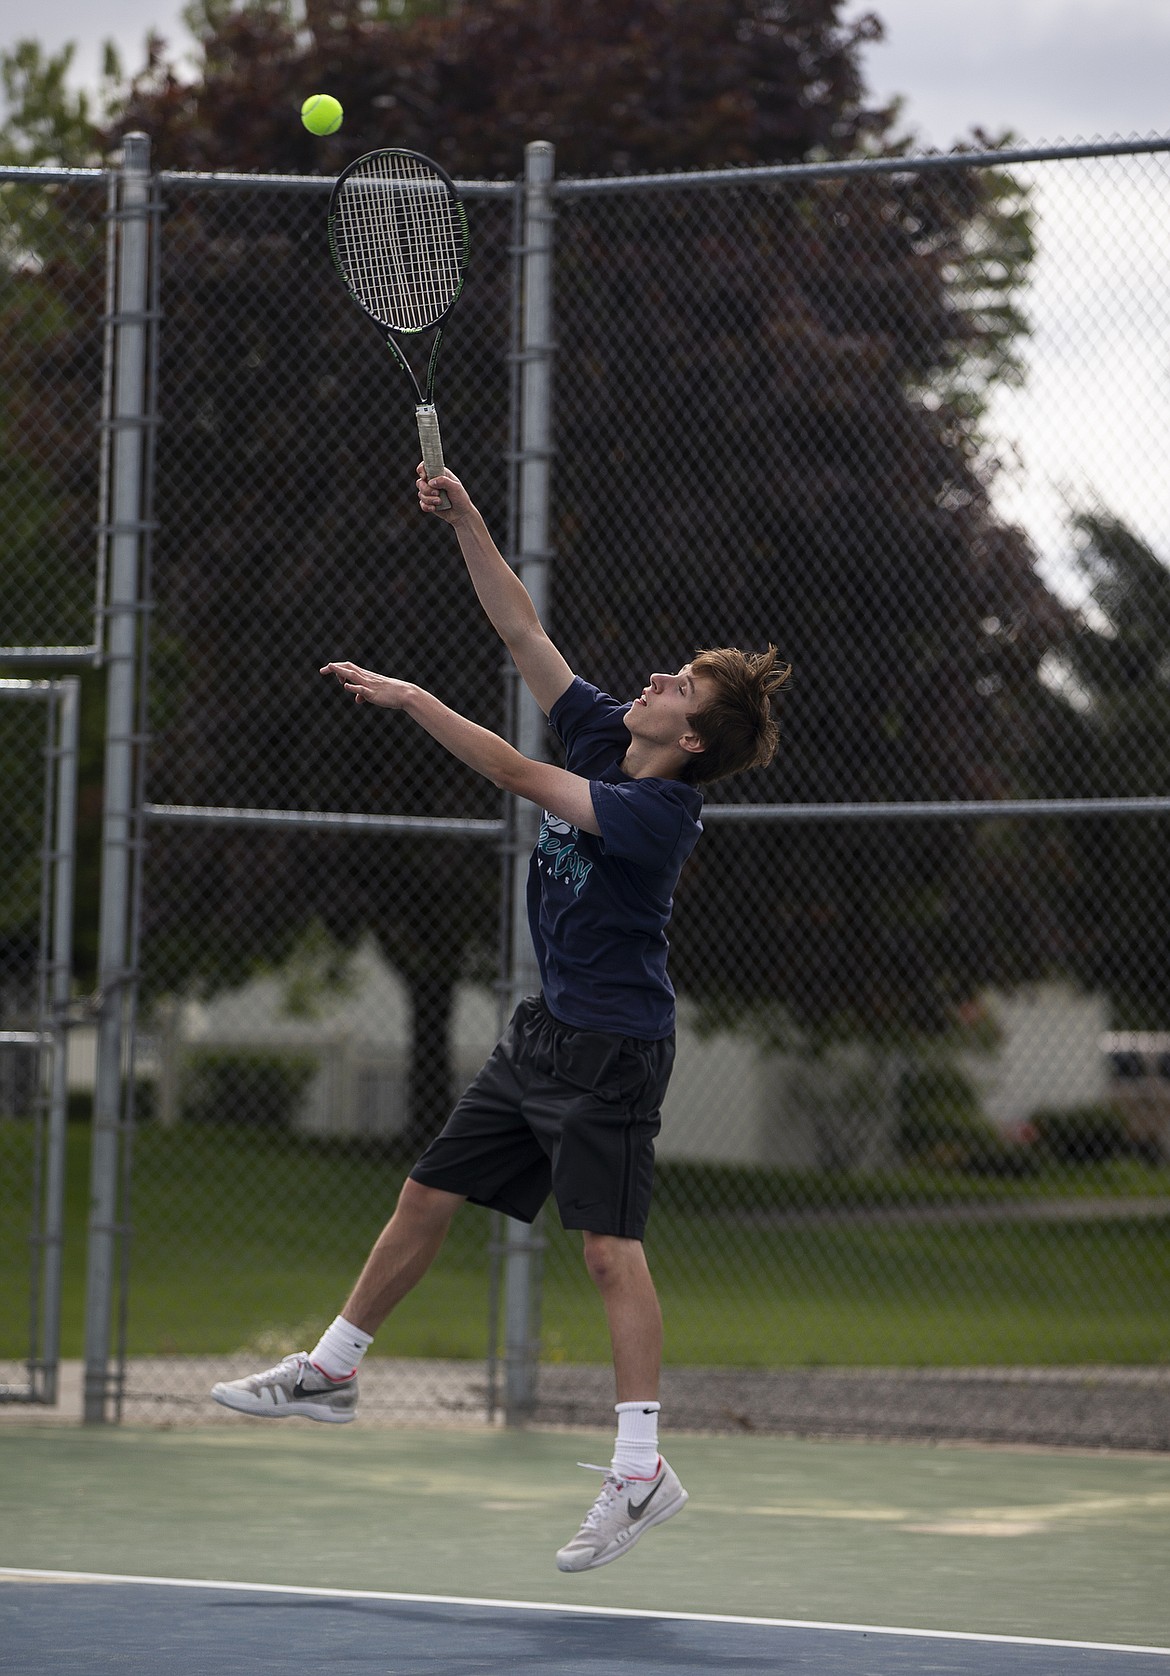 Paul Wineinger of Lake City High hits a serve in a boys doubles match at the 5A Region 1 tournament Friday at Lake City High. (LOREN BENOIT/Press)